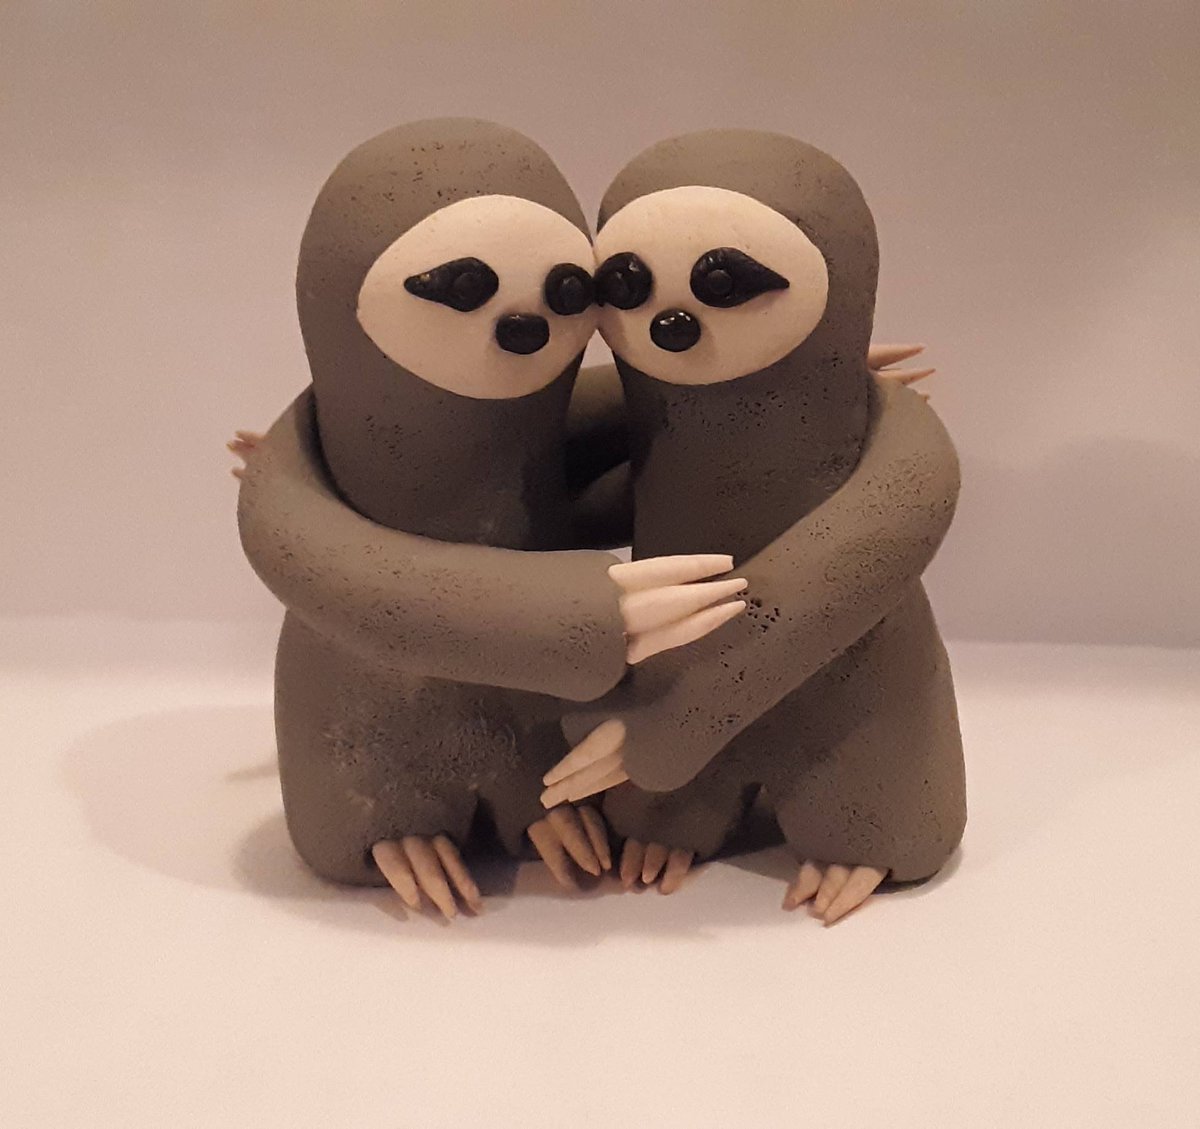 wooleverskeepsakes.etsy.com 
Excited to share the latest addition to my #etsy shop: Sloth Love Wedding Cake Topper &lt;3 This adorable couple is 100% handmade! #weddings #slothcaketopper #weddingkeepsake #cute #animalsinlove #partyfavors #specialoccassions etsy.me/2HP86I8